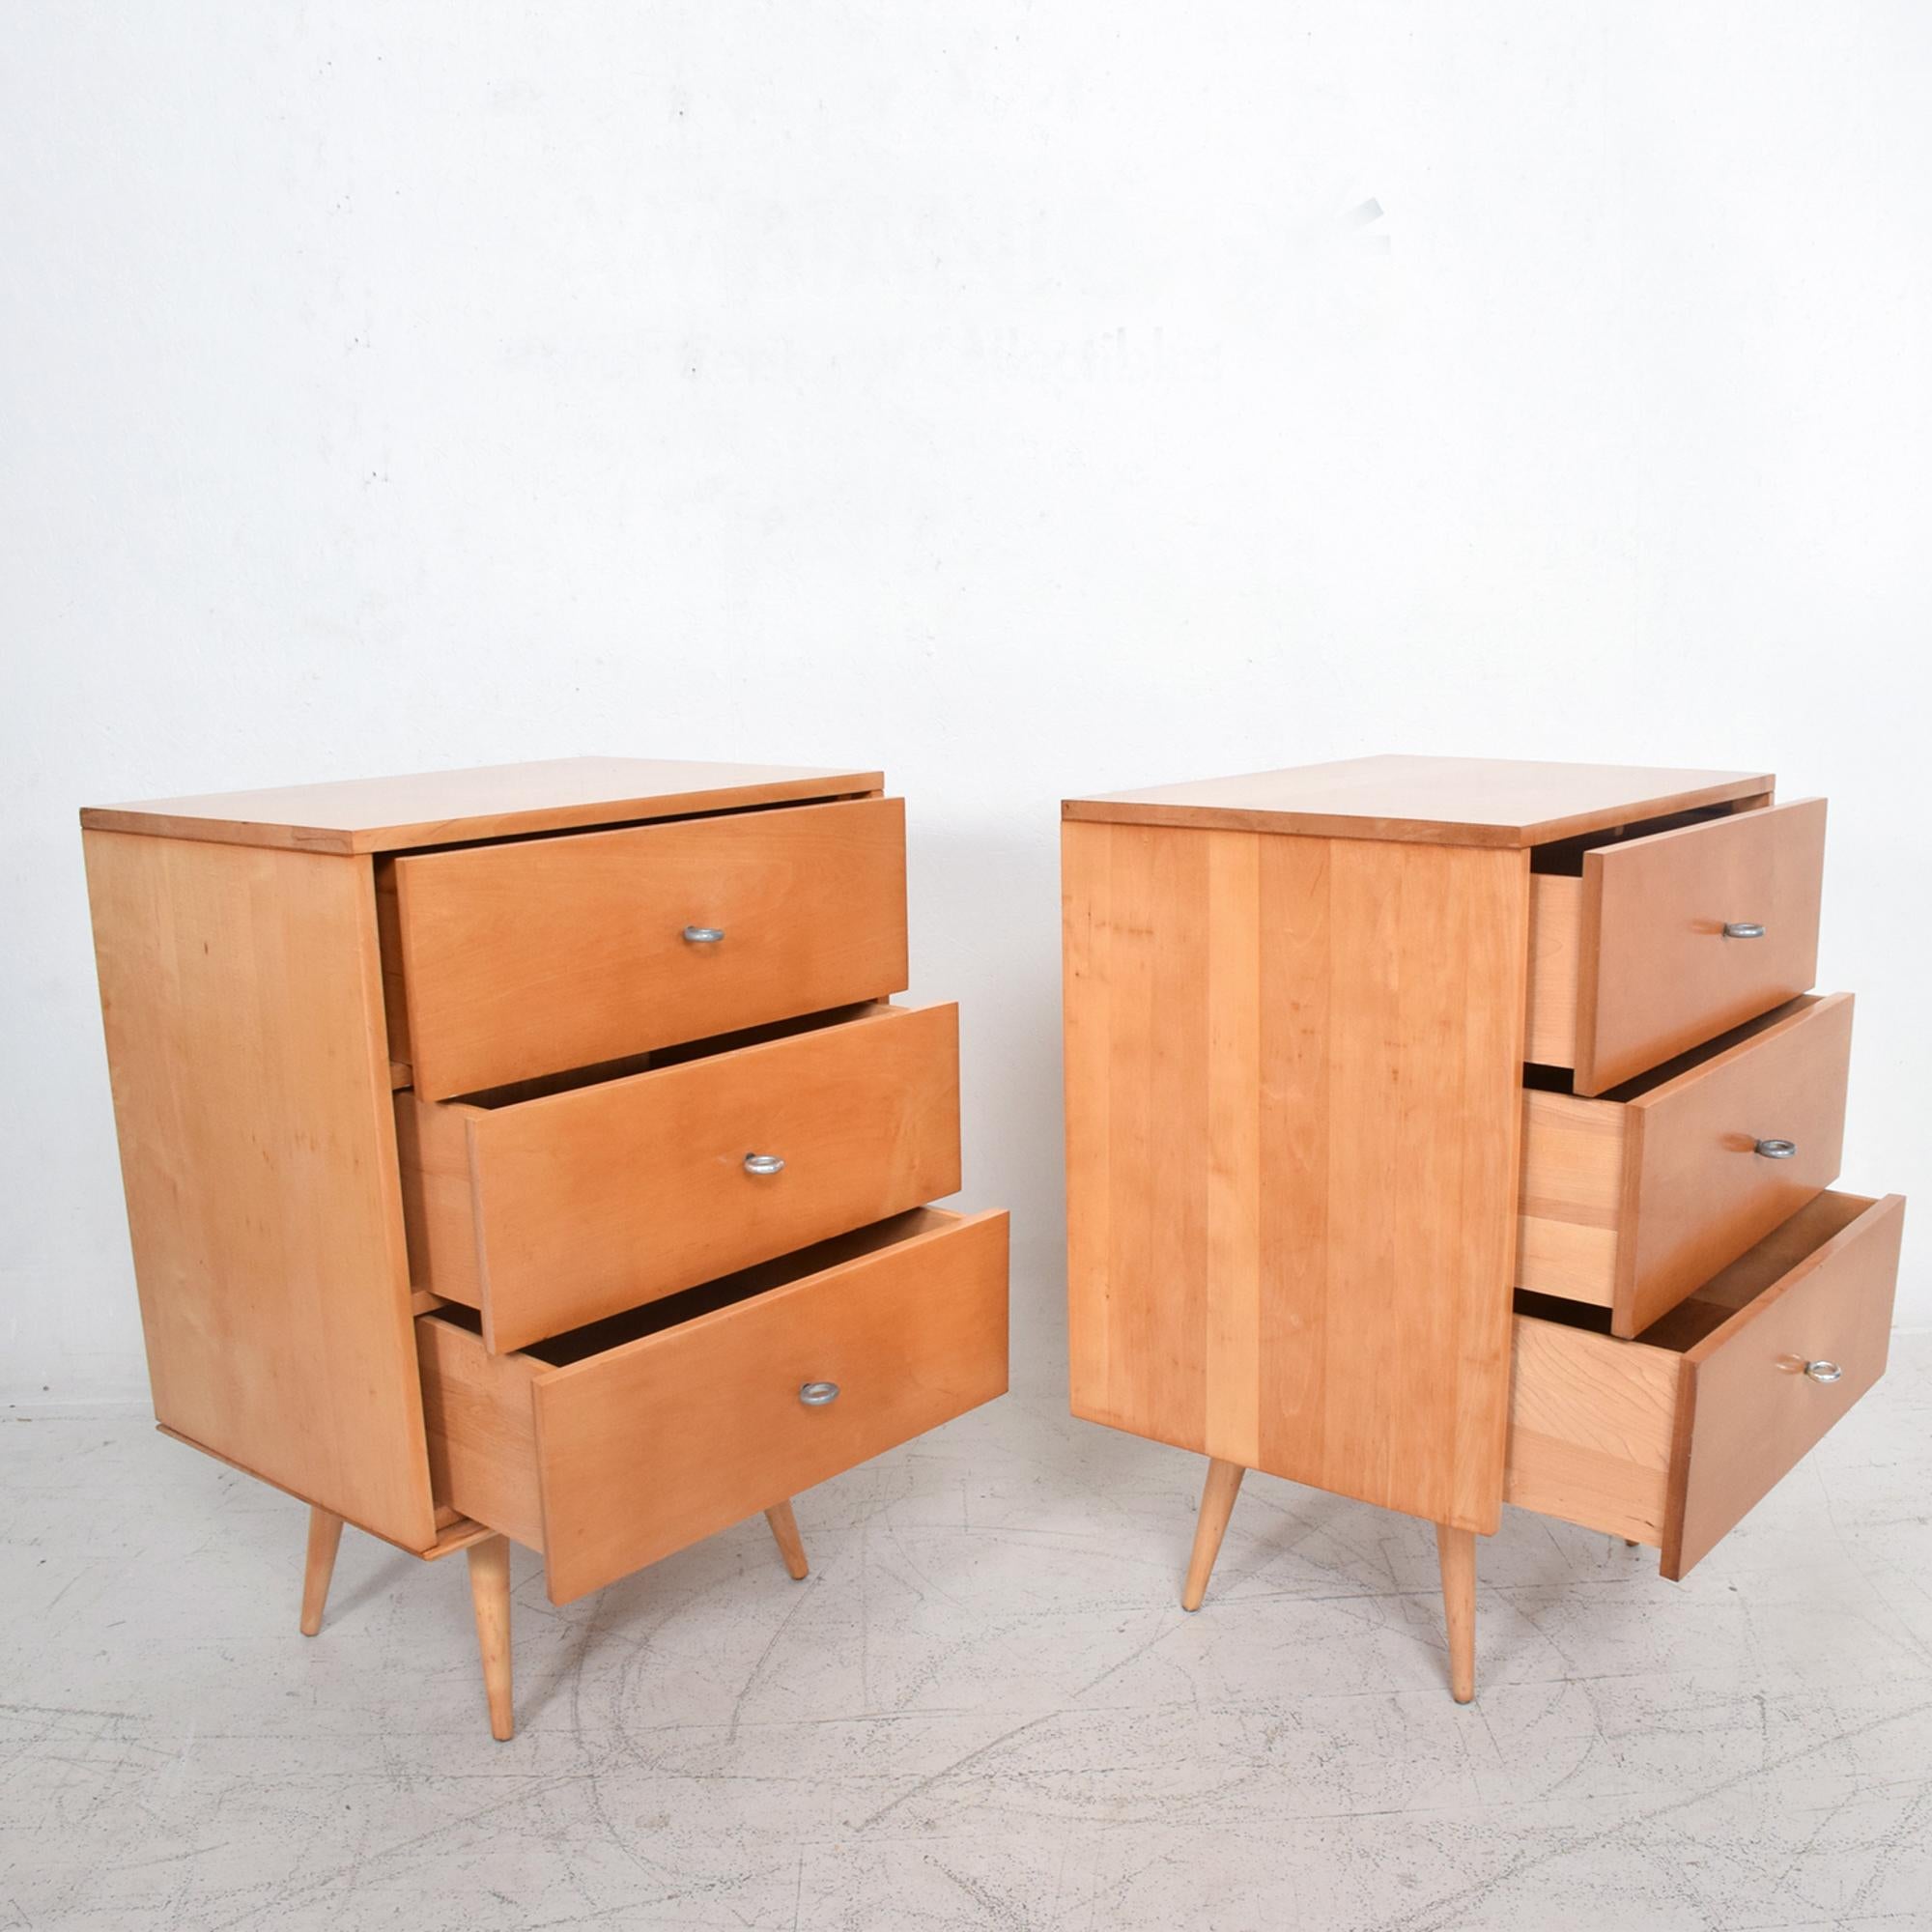 Mid-20th Century Paul McCobb Pair of Dressers Lacquered Maple Silver Pulls Americana, 1950s